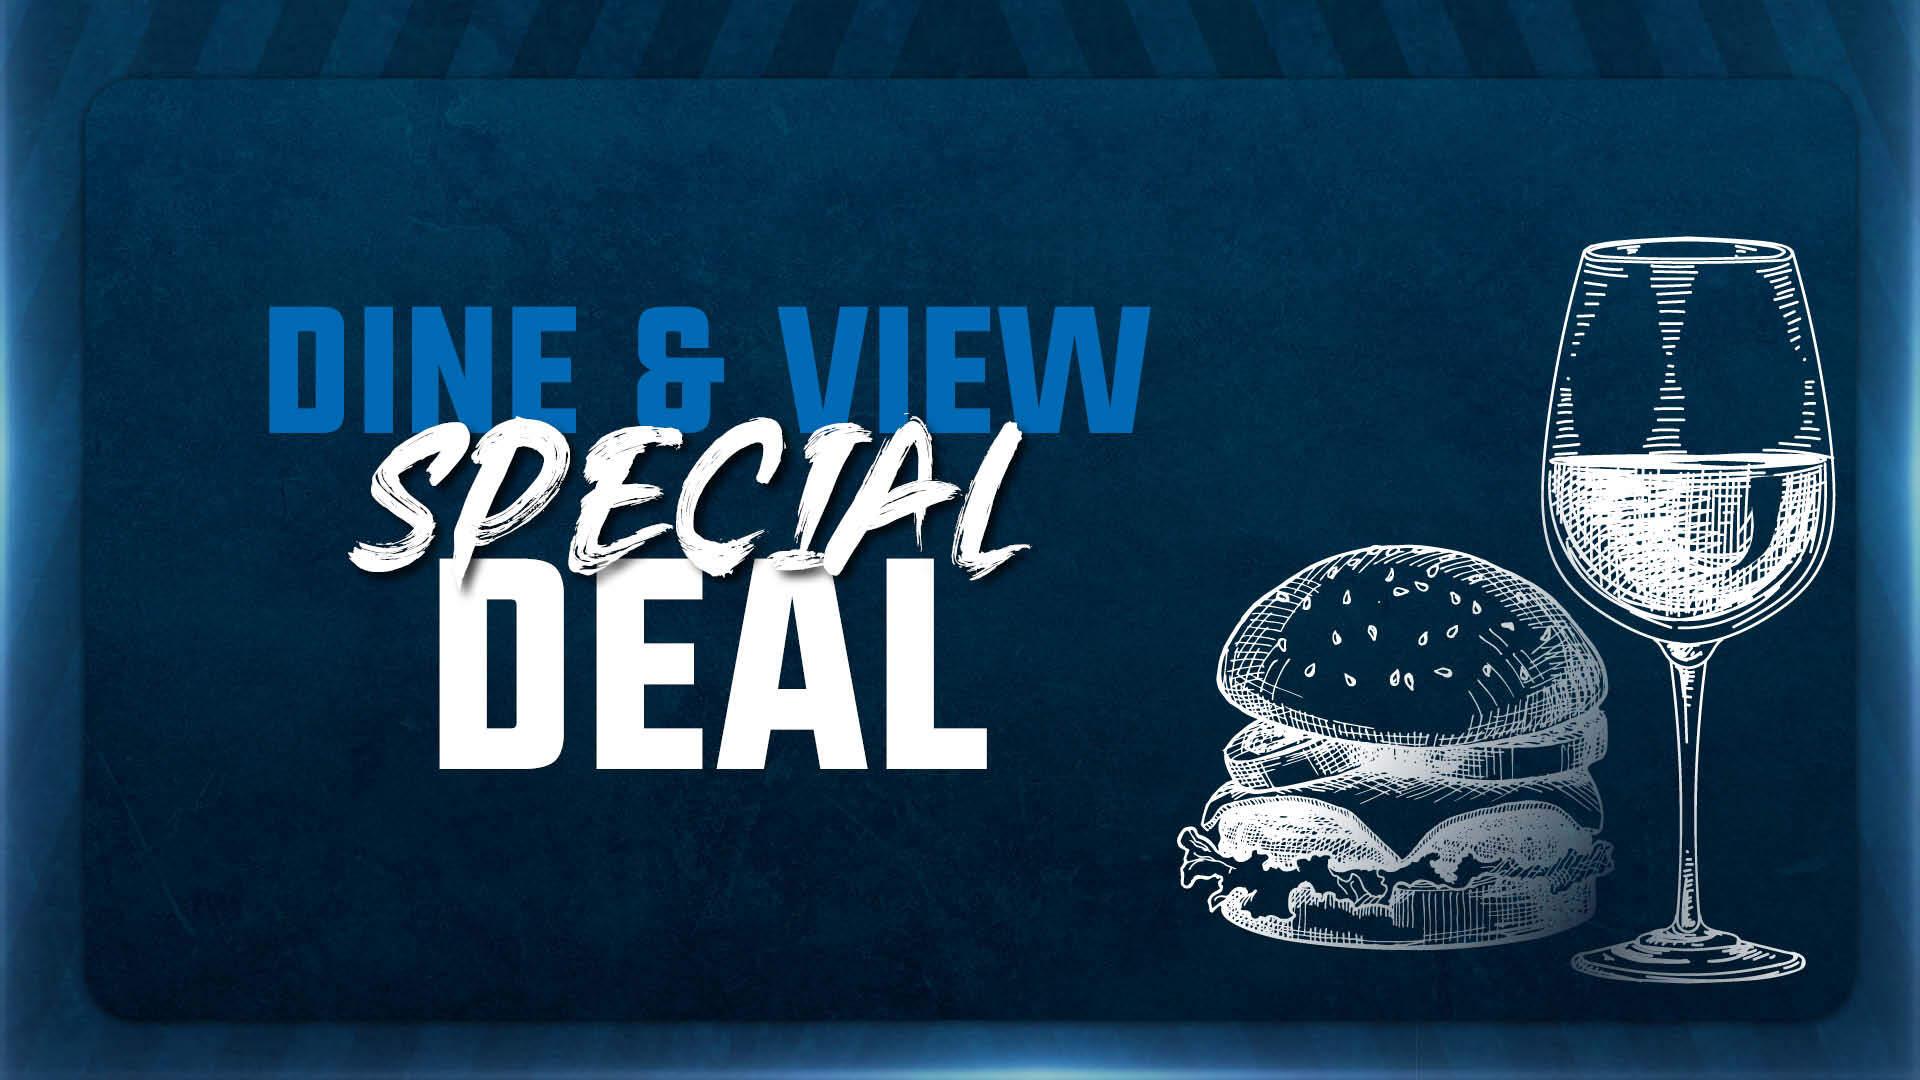 Dine and View Special Deal Burger Package